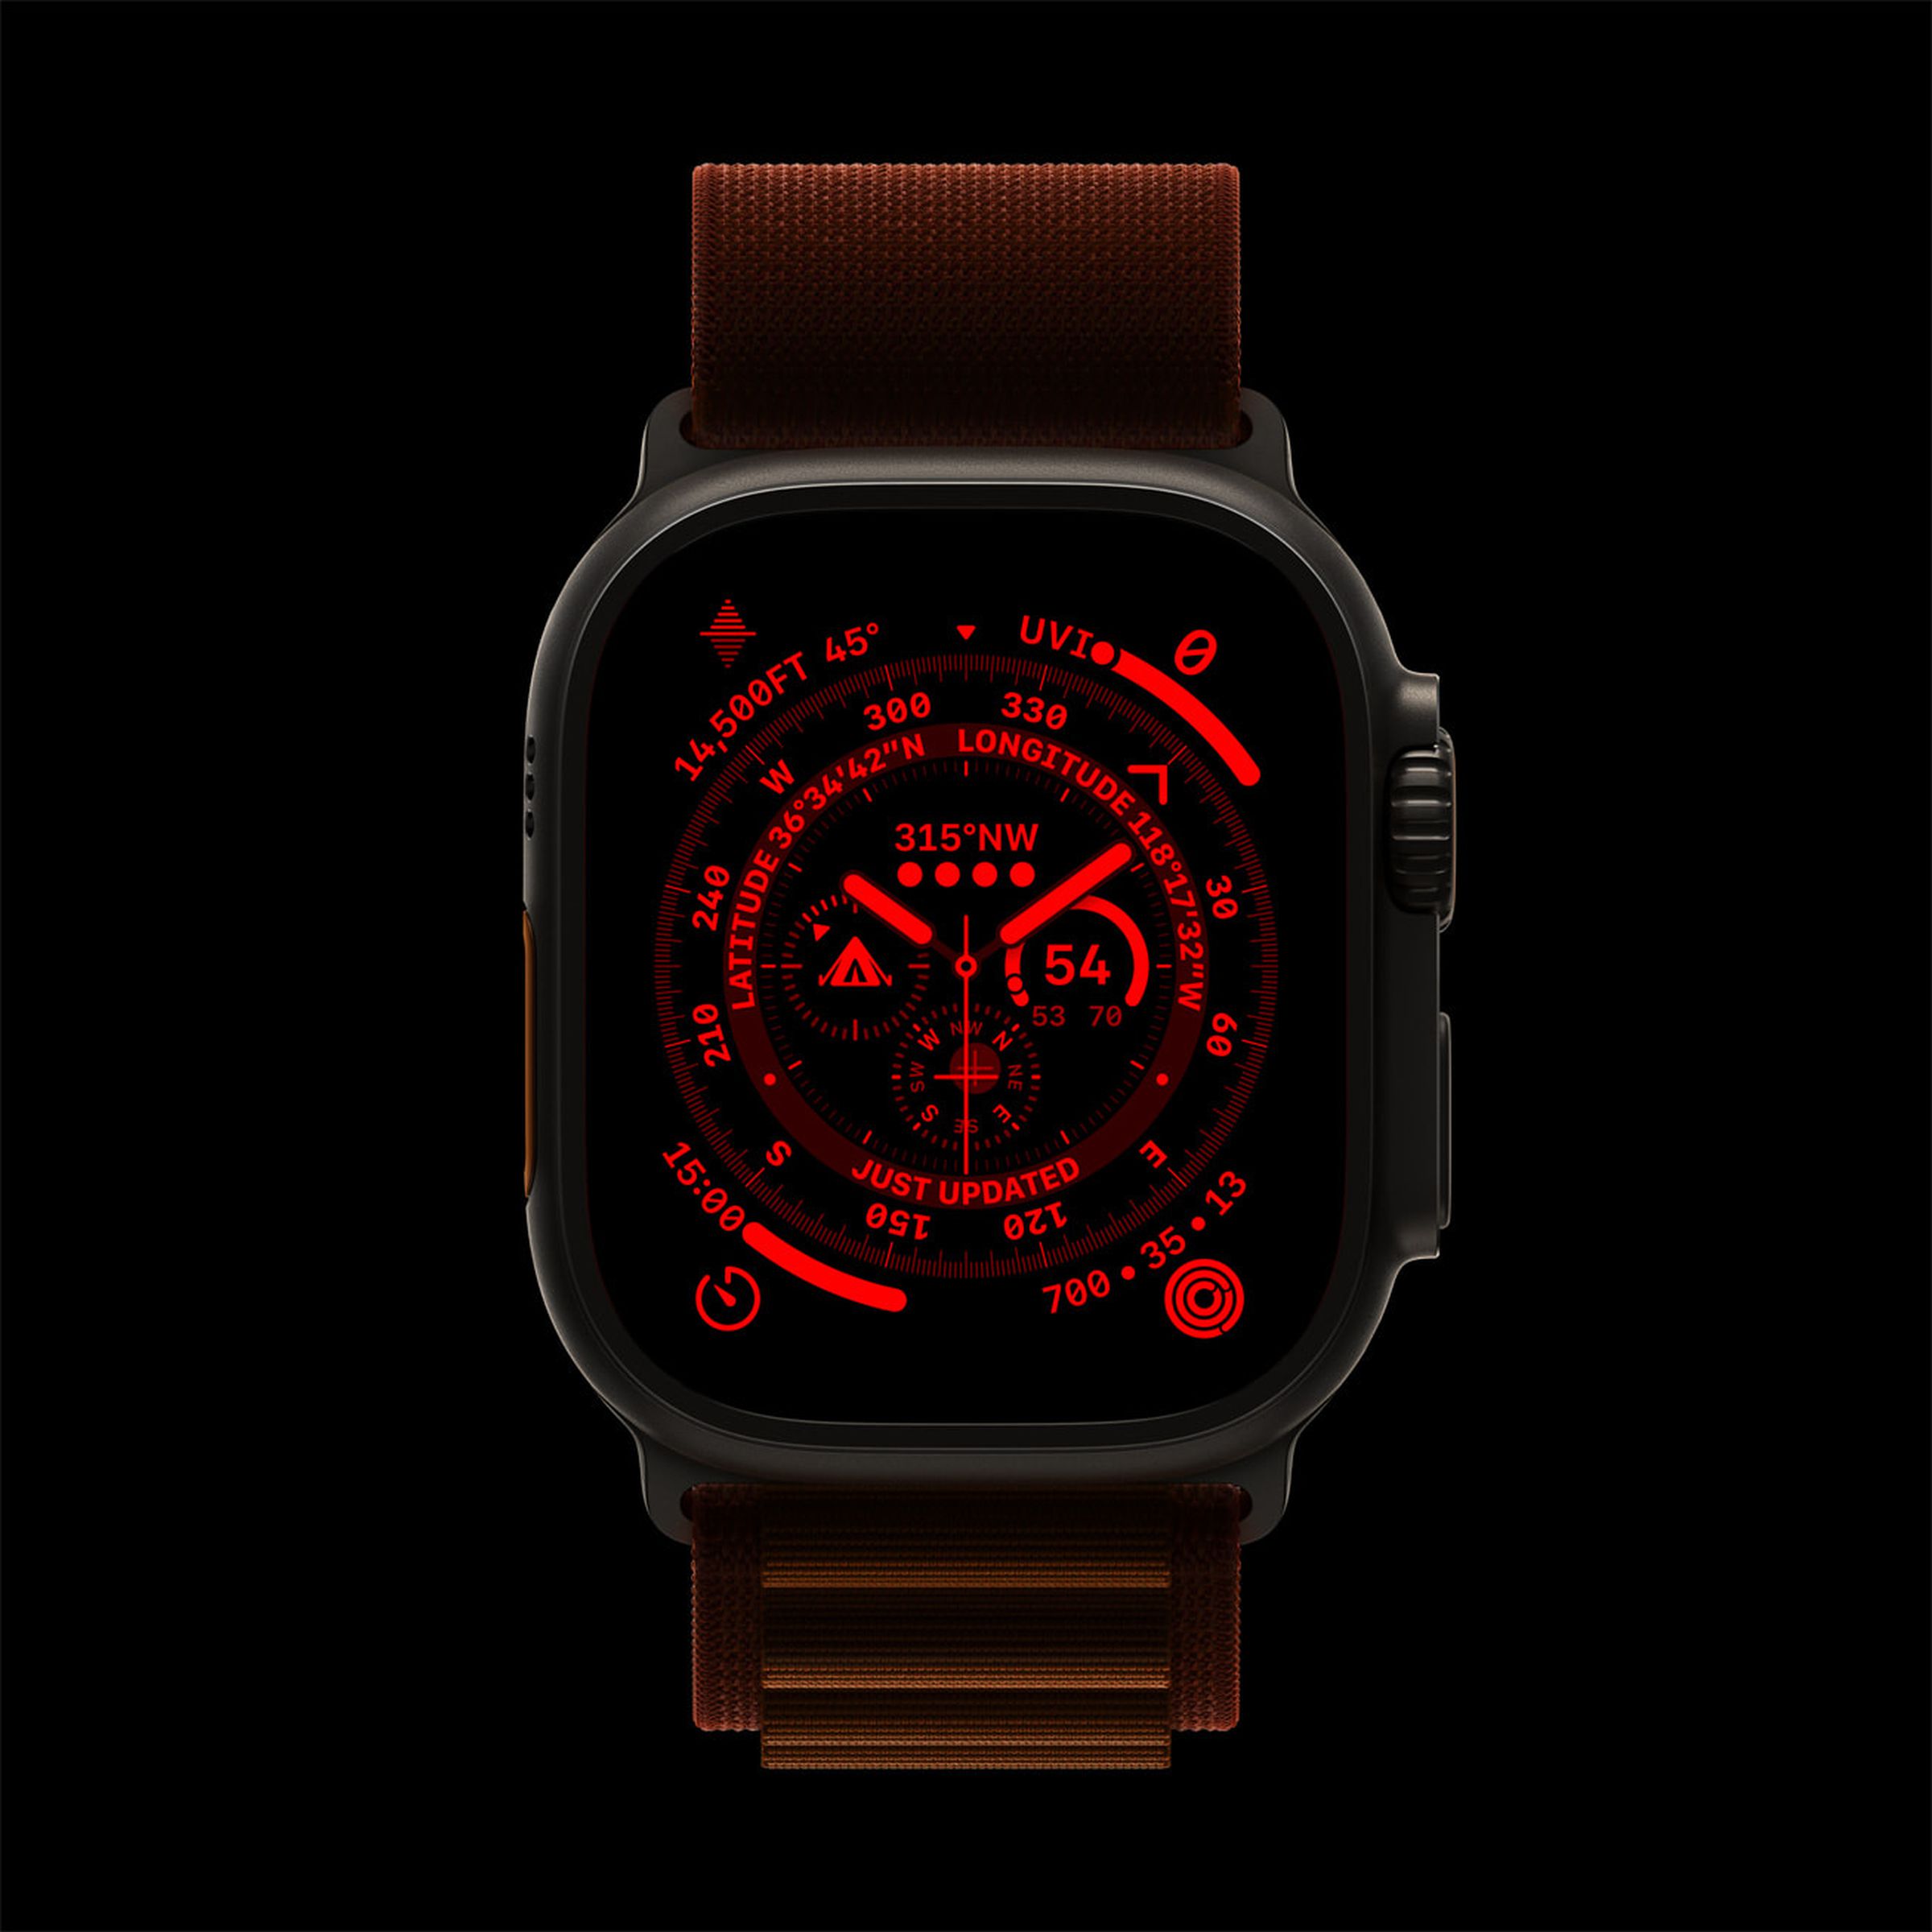 Image showing the Apple Watch with the watch face in red.